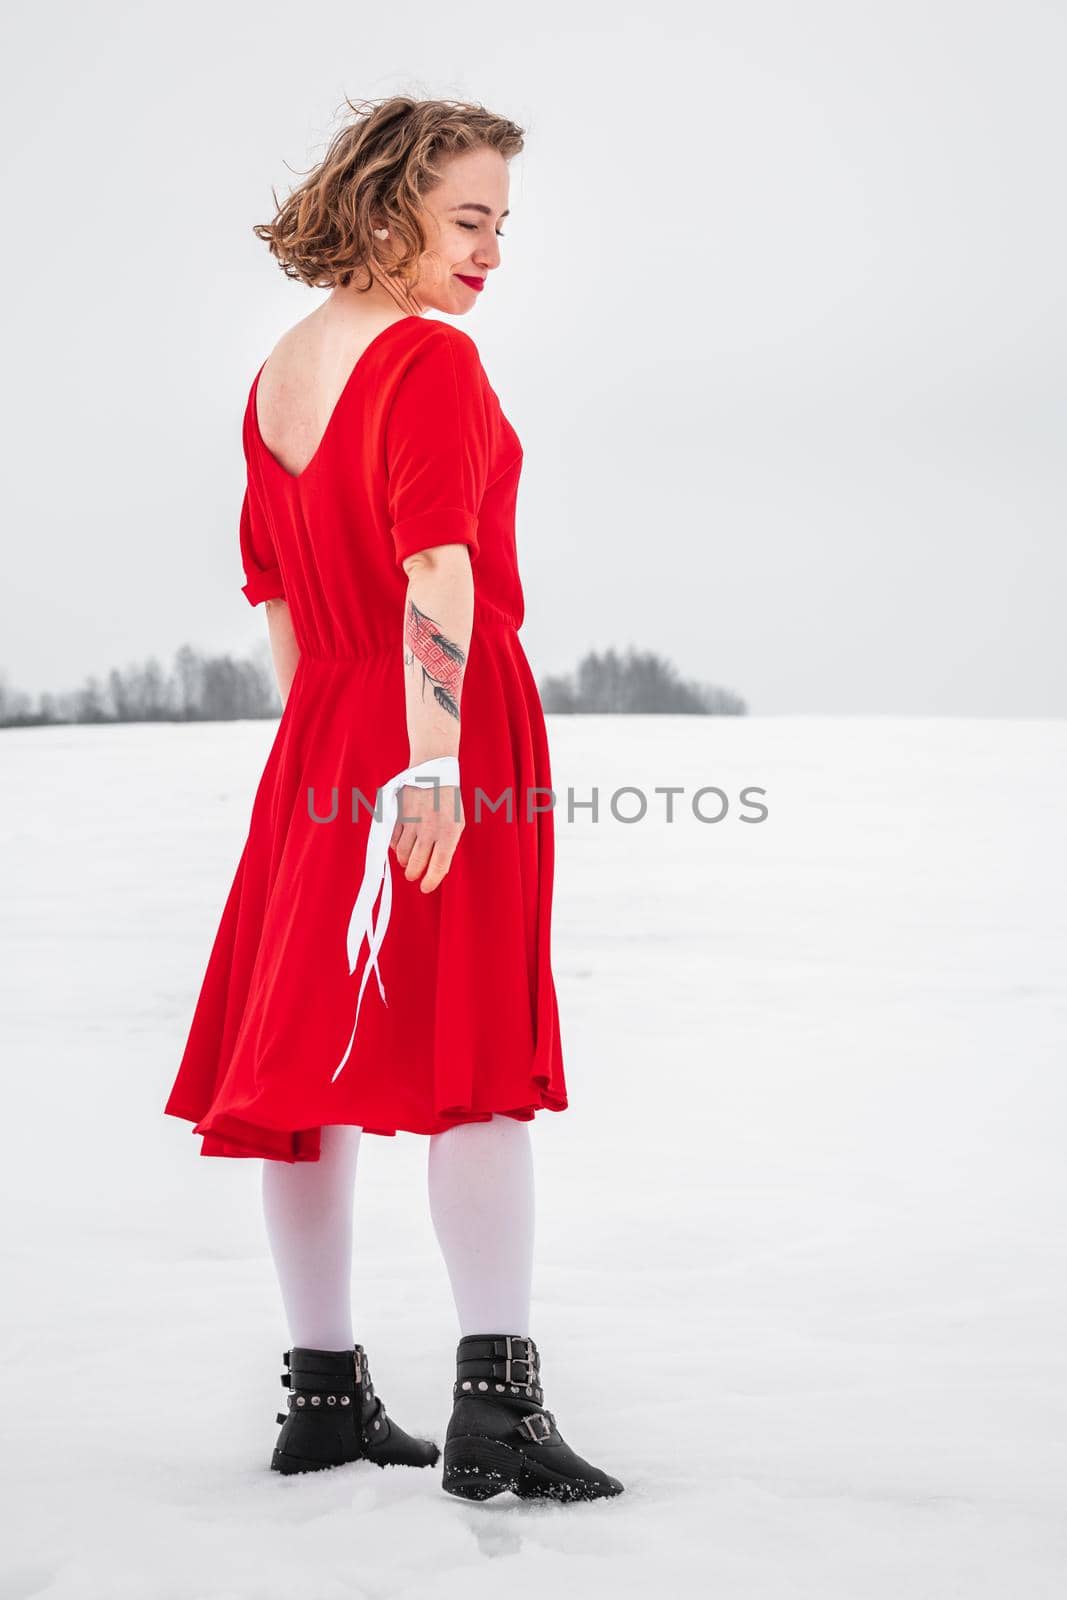 Beautiful woman in a red dress by RuslanKphoto